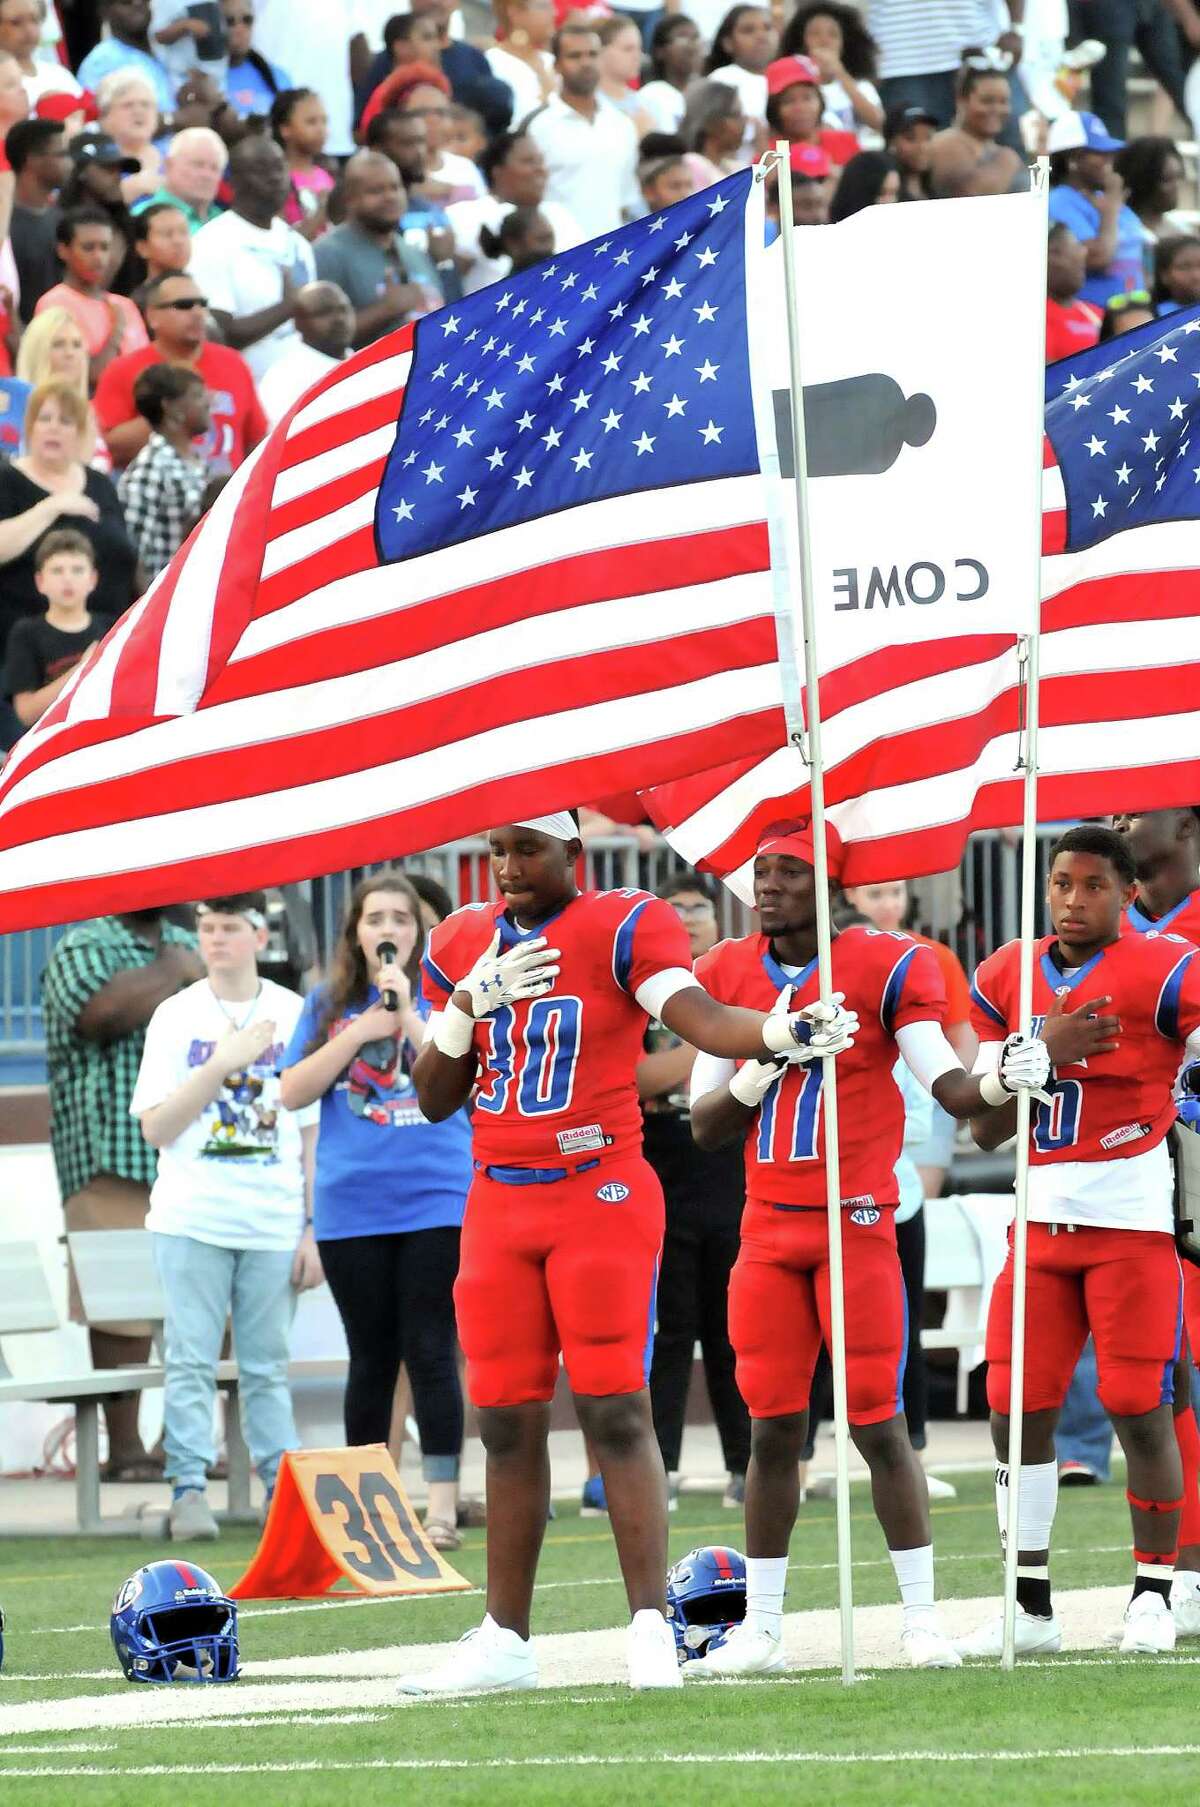 Members of the West Brook Bruins stand on Sept. 2 with their hands over their hearts, as several hold the American Flag as the national anthem is played prior to their Week 2 game against the Ozen Panthers at the Thomas Center in Beaumont. (Mike Tobias/The Enterprise)